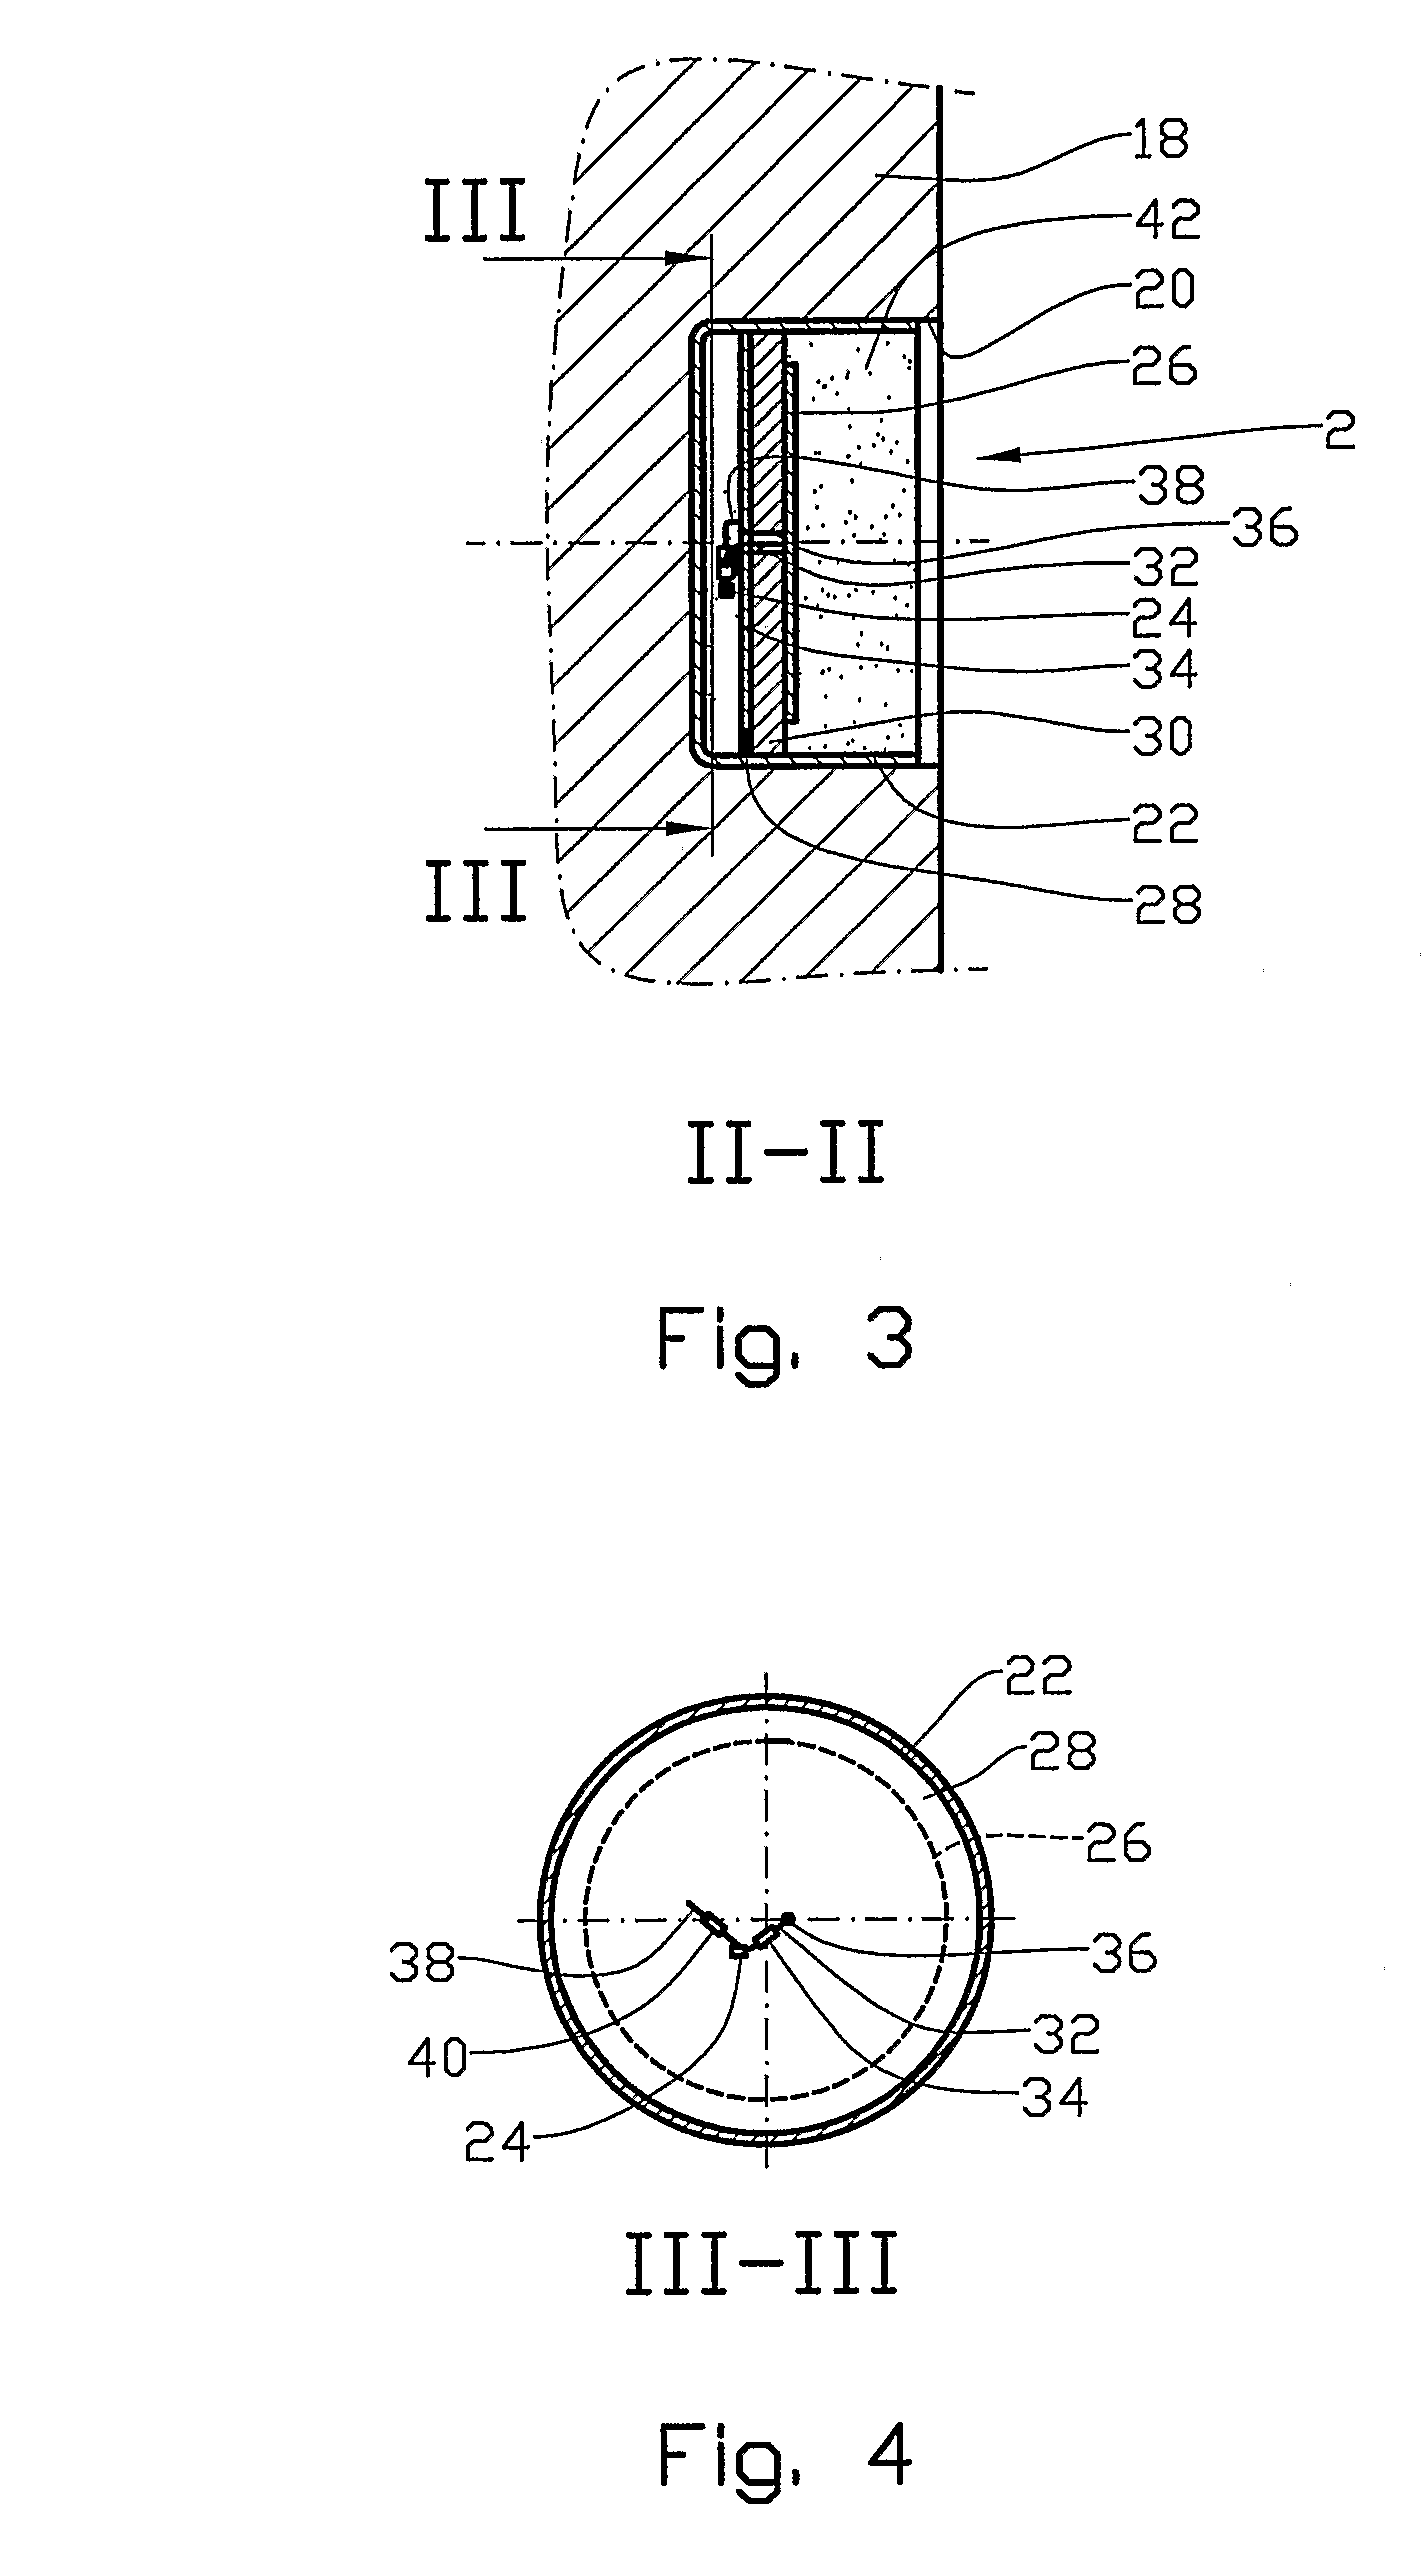 Electronic ID tag and co-operating antenna